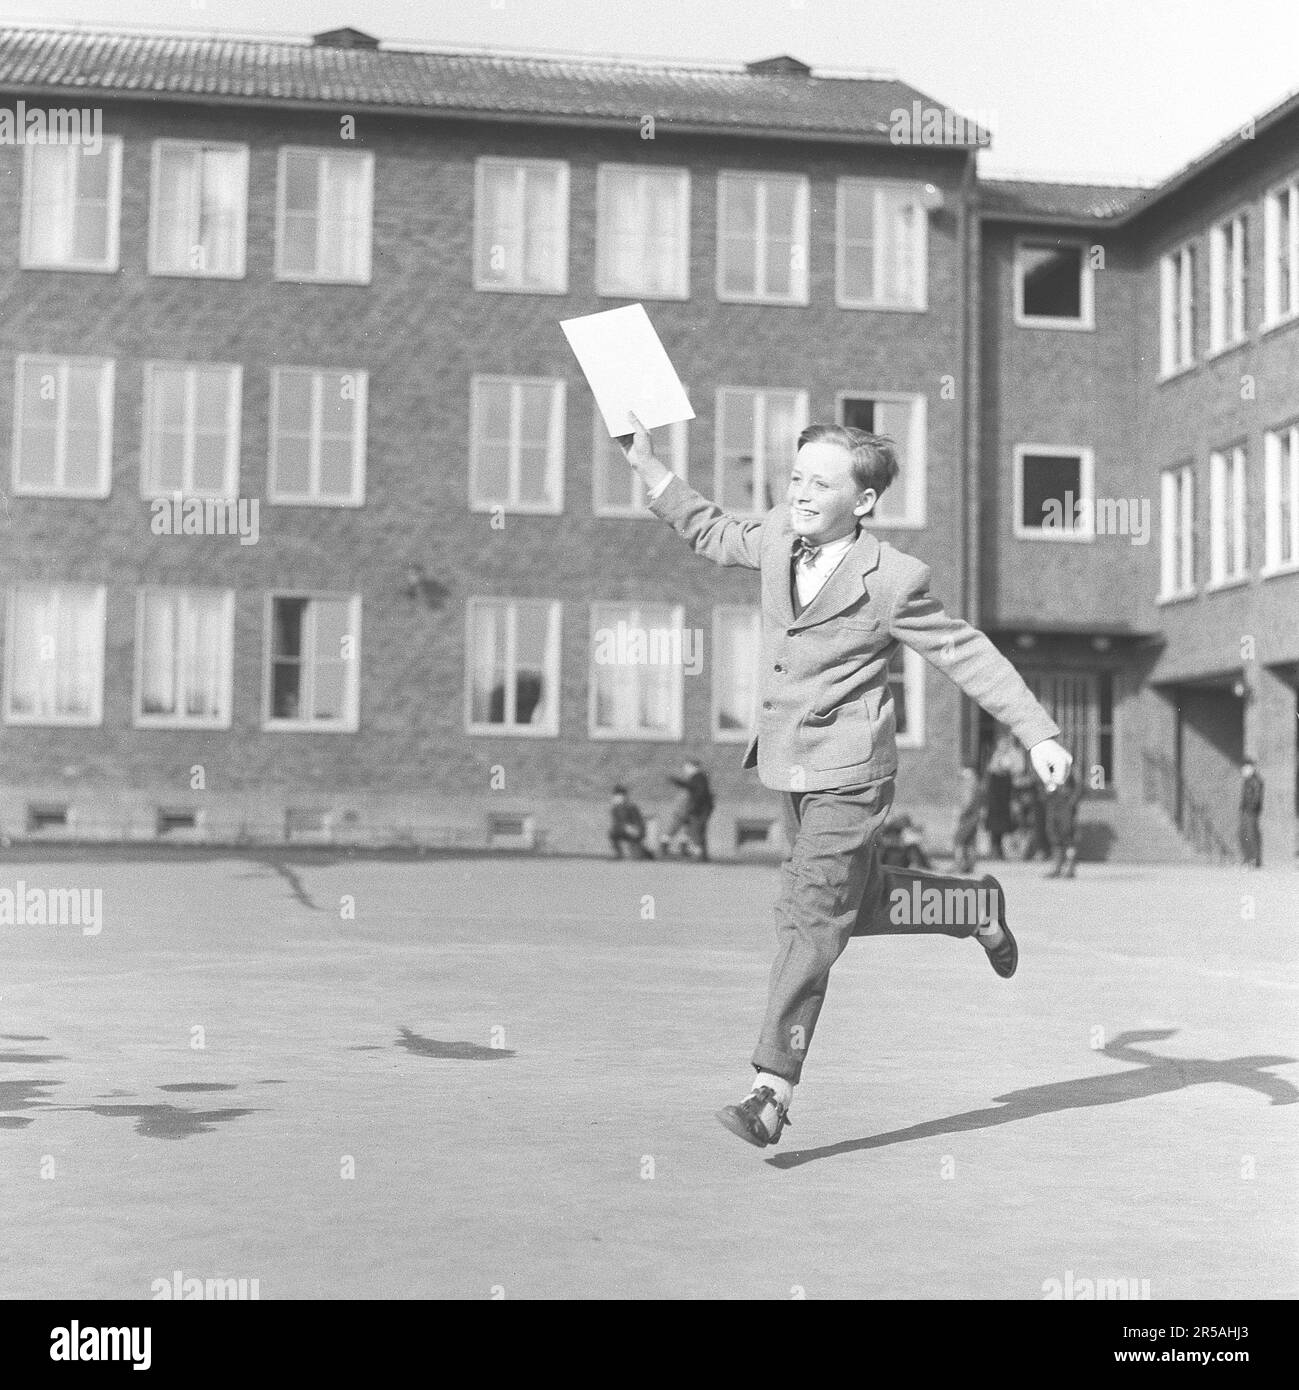 The last school day. The boy jumps happily on his last school day for the term, holding his grade paper in the hand. Well dressed as children were in the 1950s decade. Sweden 1950s. ref BV40-11 Stock Photo